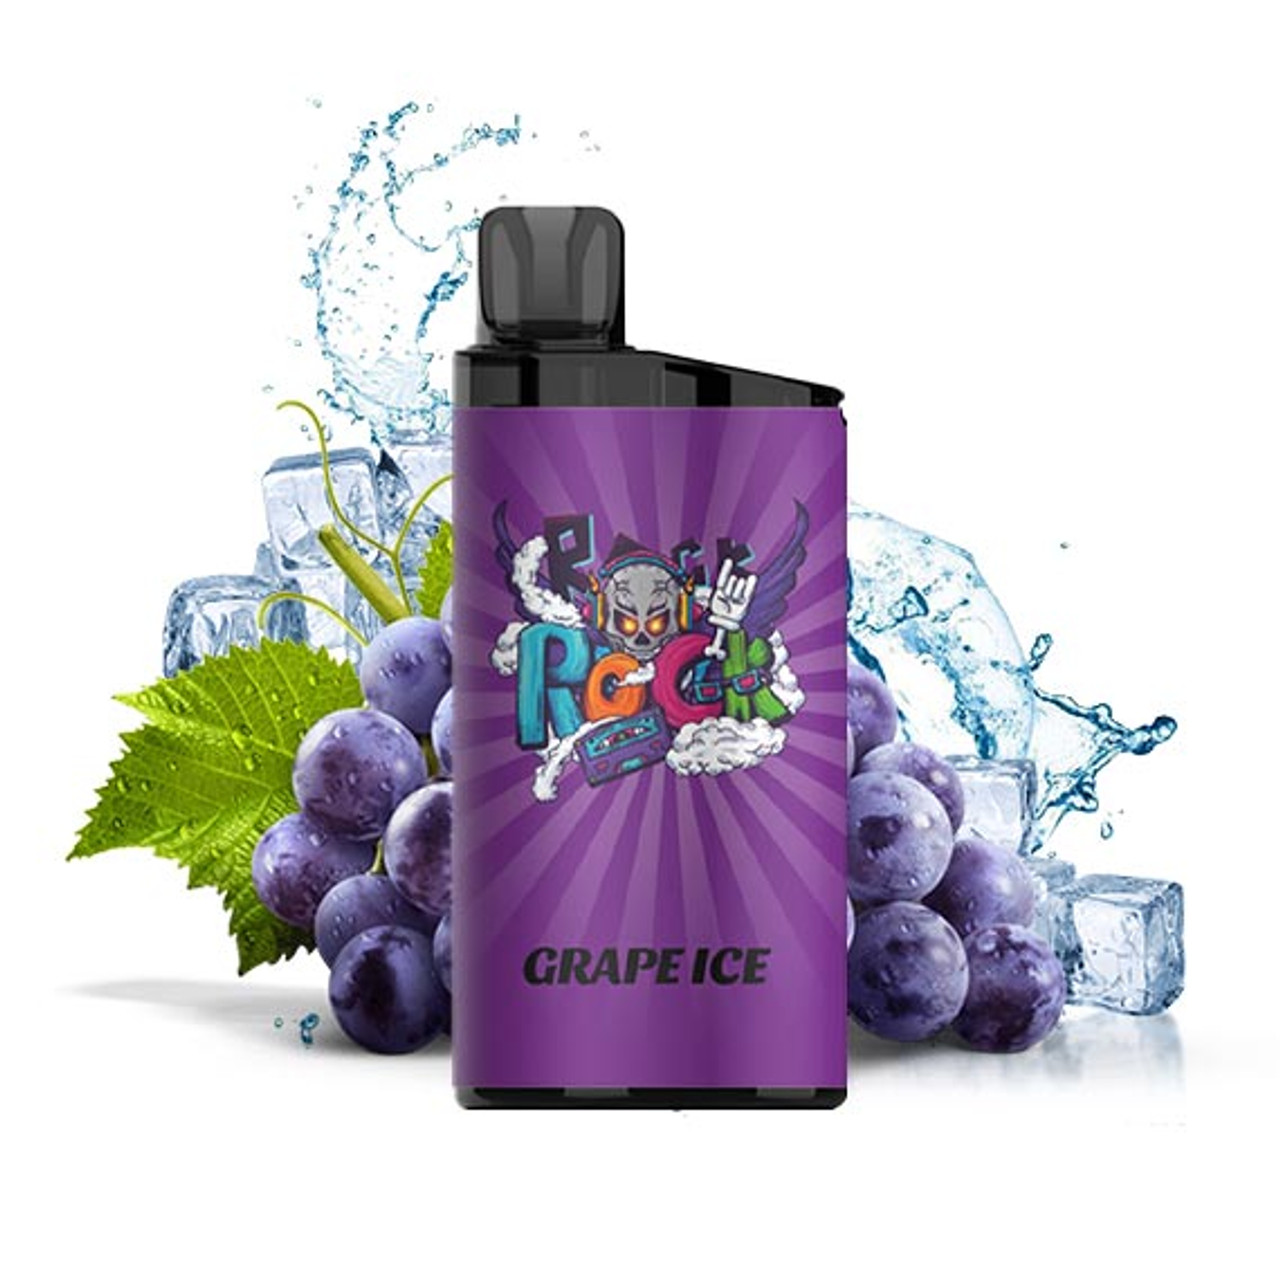 try the Grape Ice flavour now for fresh vaping experience